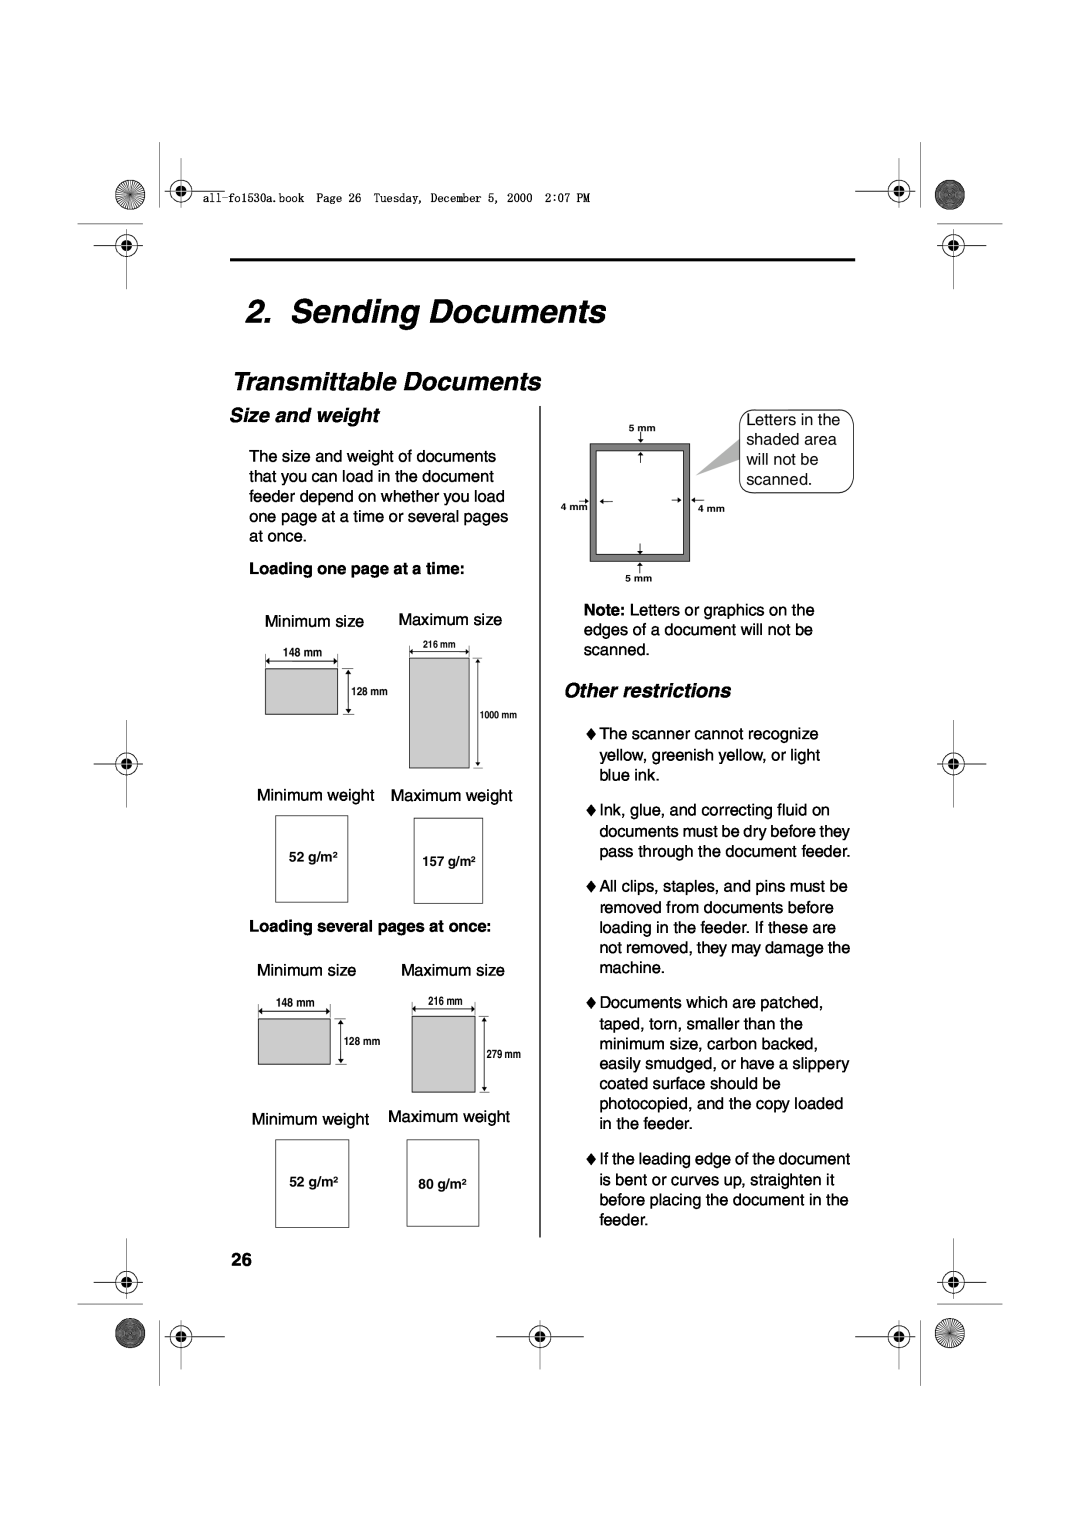 Sharp FO-1530 Sending Documents, Transmittable Documents, Size and weight, Other restrictions, Loading one page at a time 